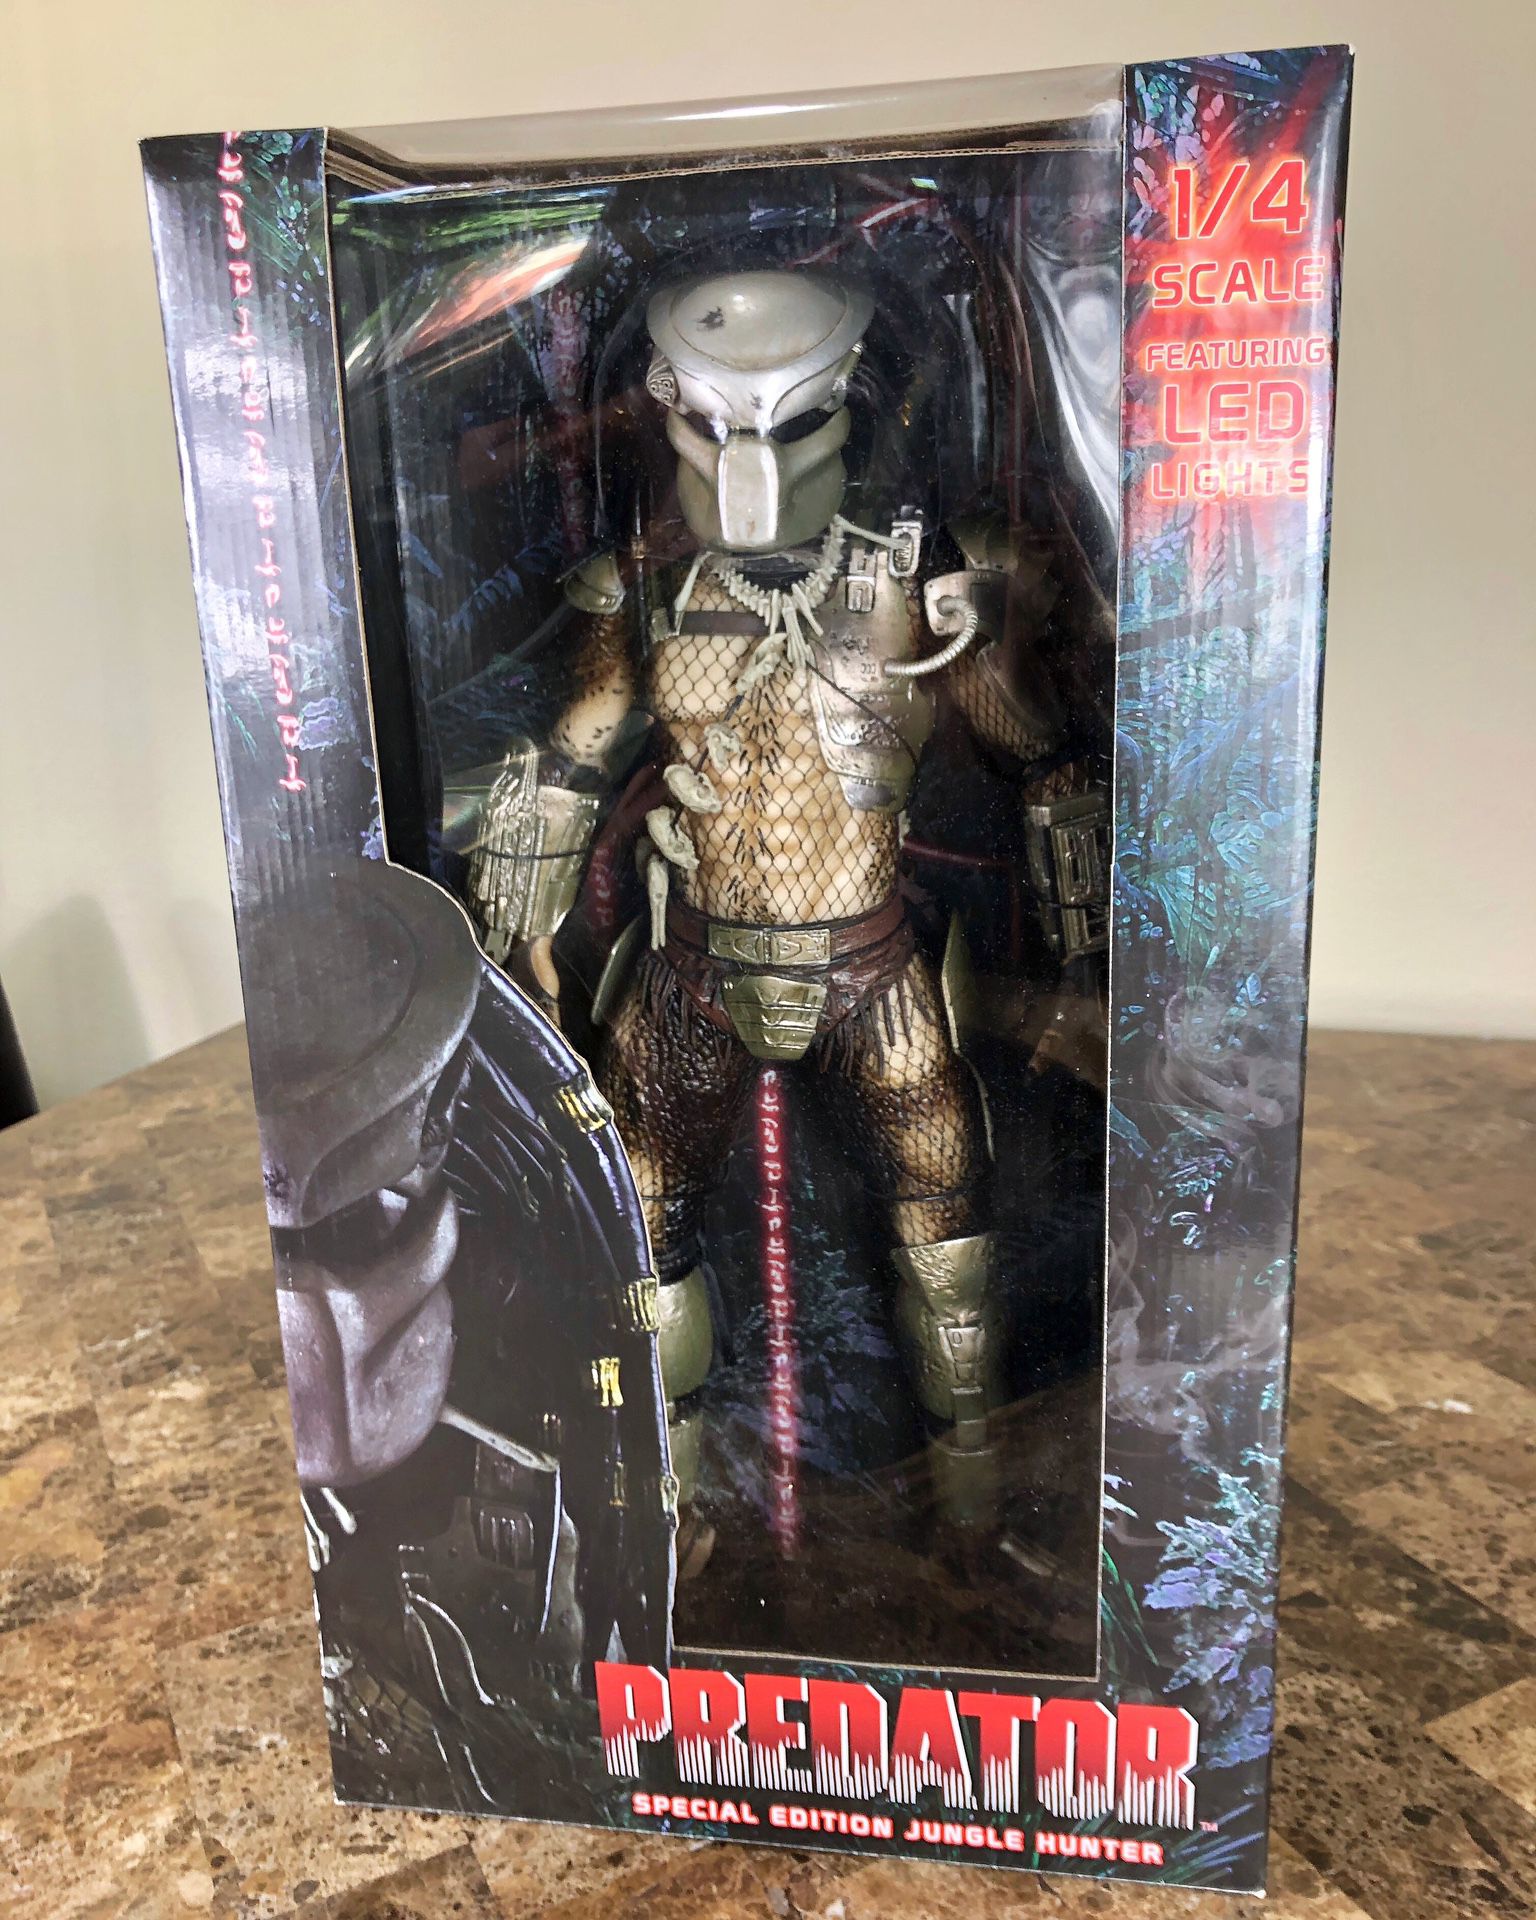 NEW 1/4 Scale Neca Predator with Led Lights 18 Inch Action Figure Horror Hot Toys